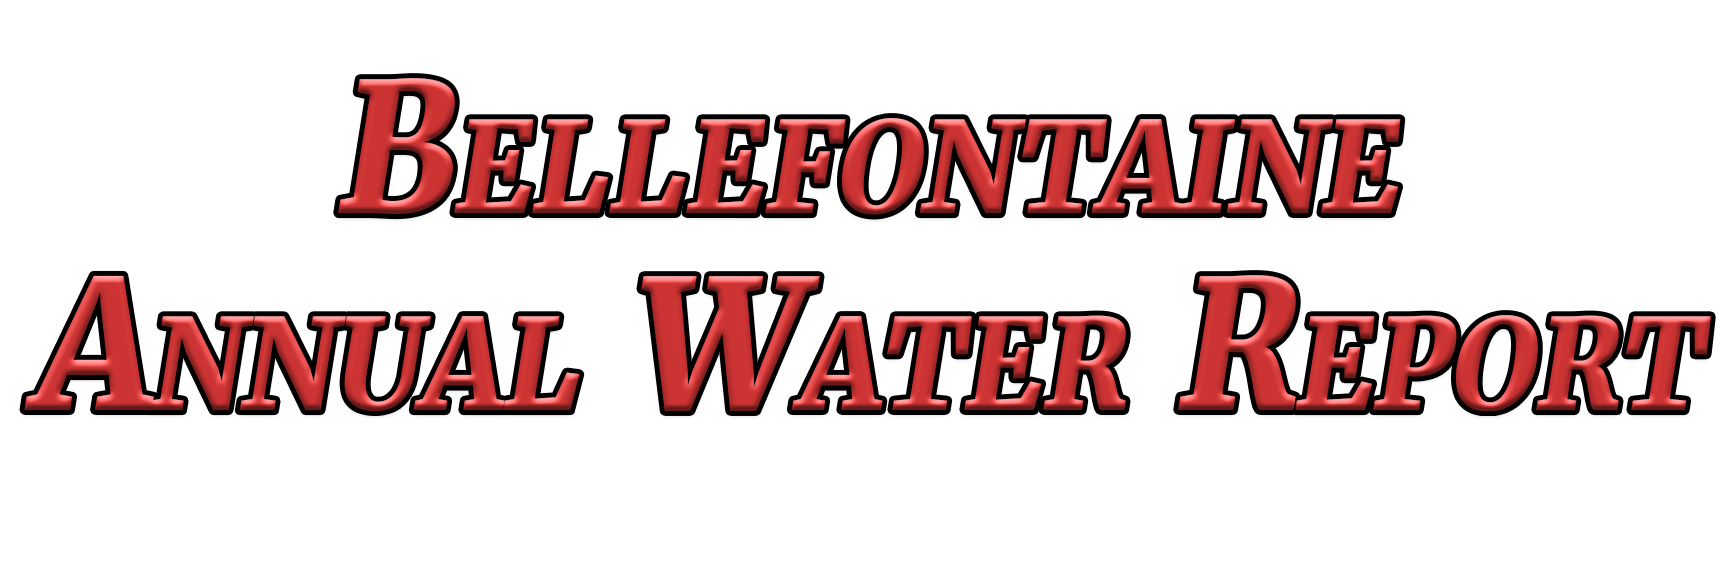 Bellefontaine Annual Water Report